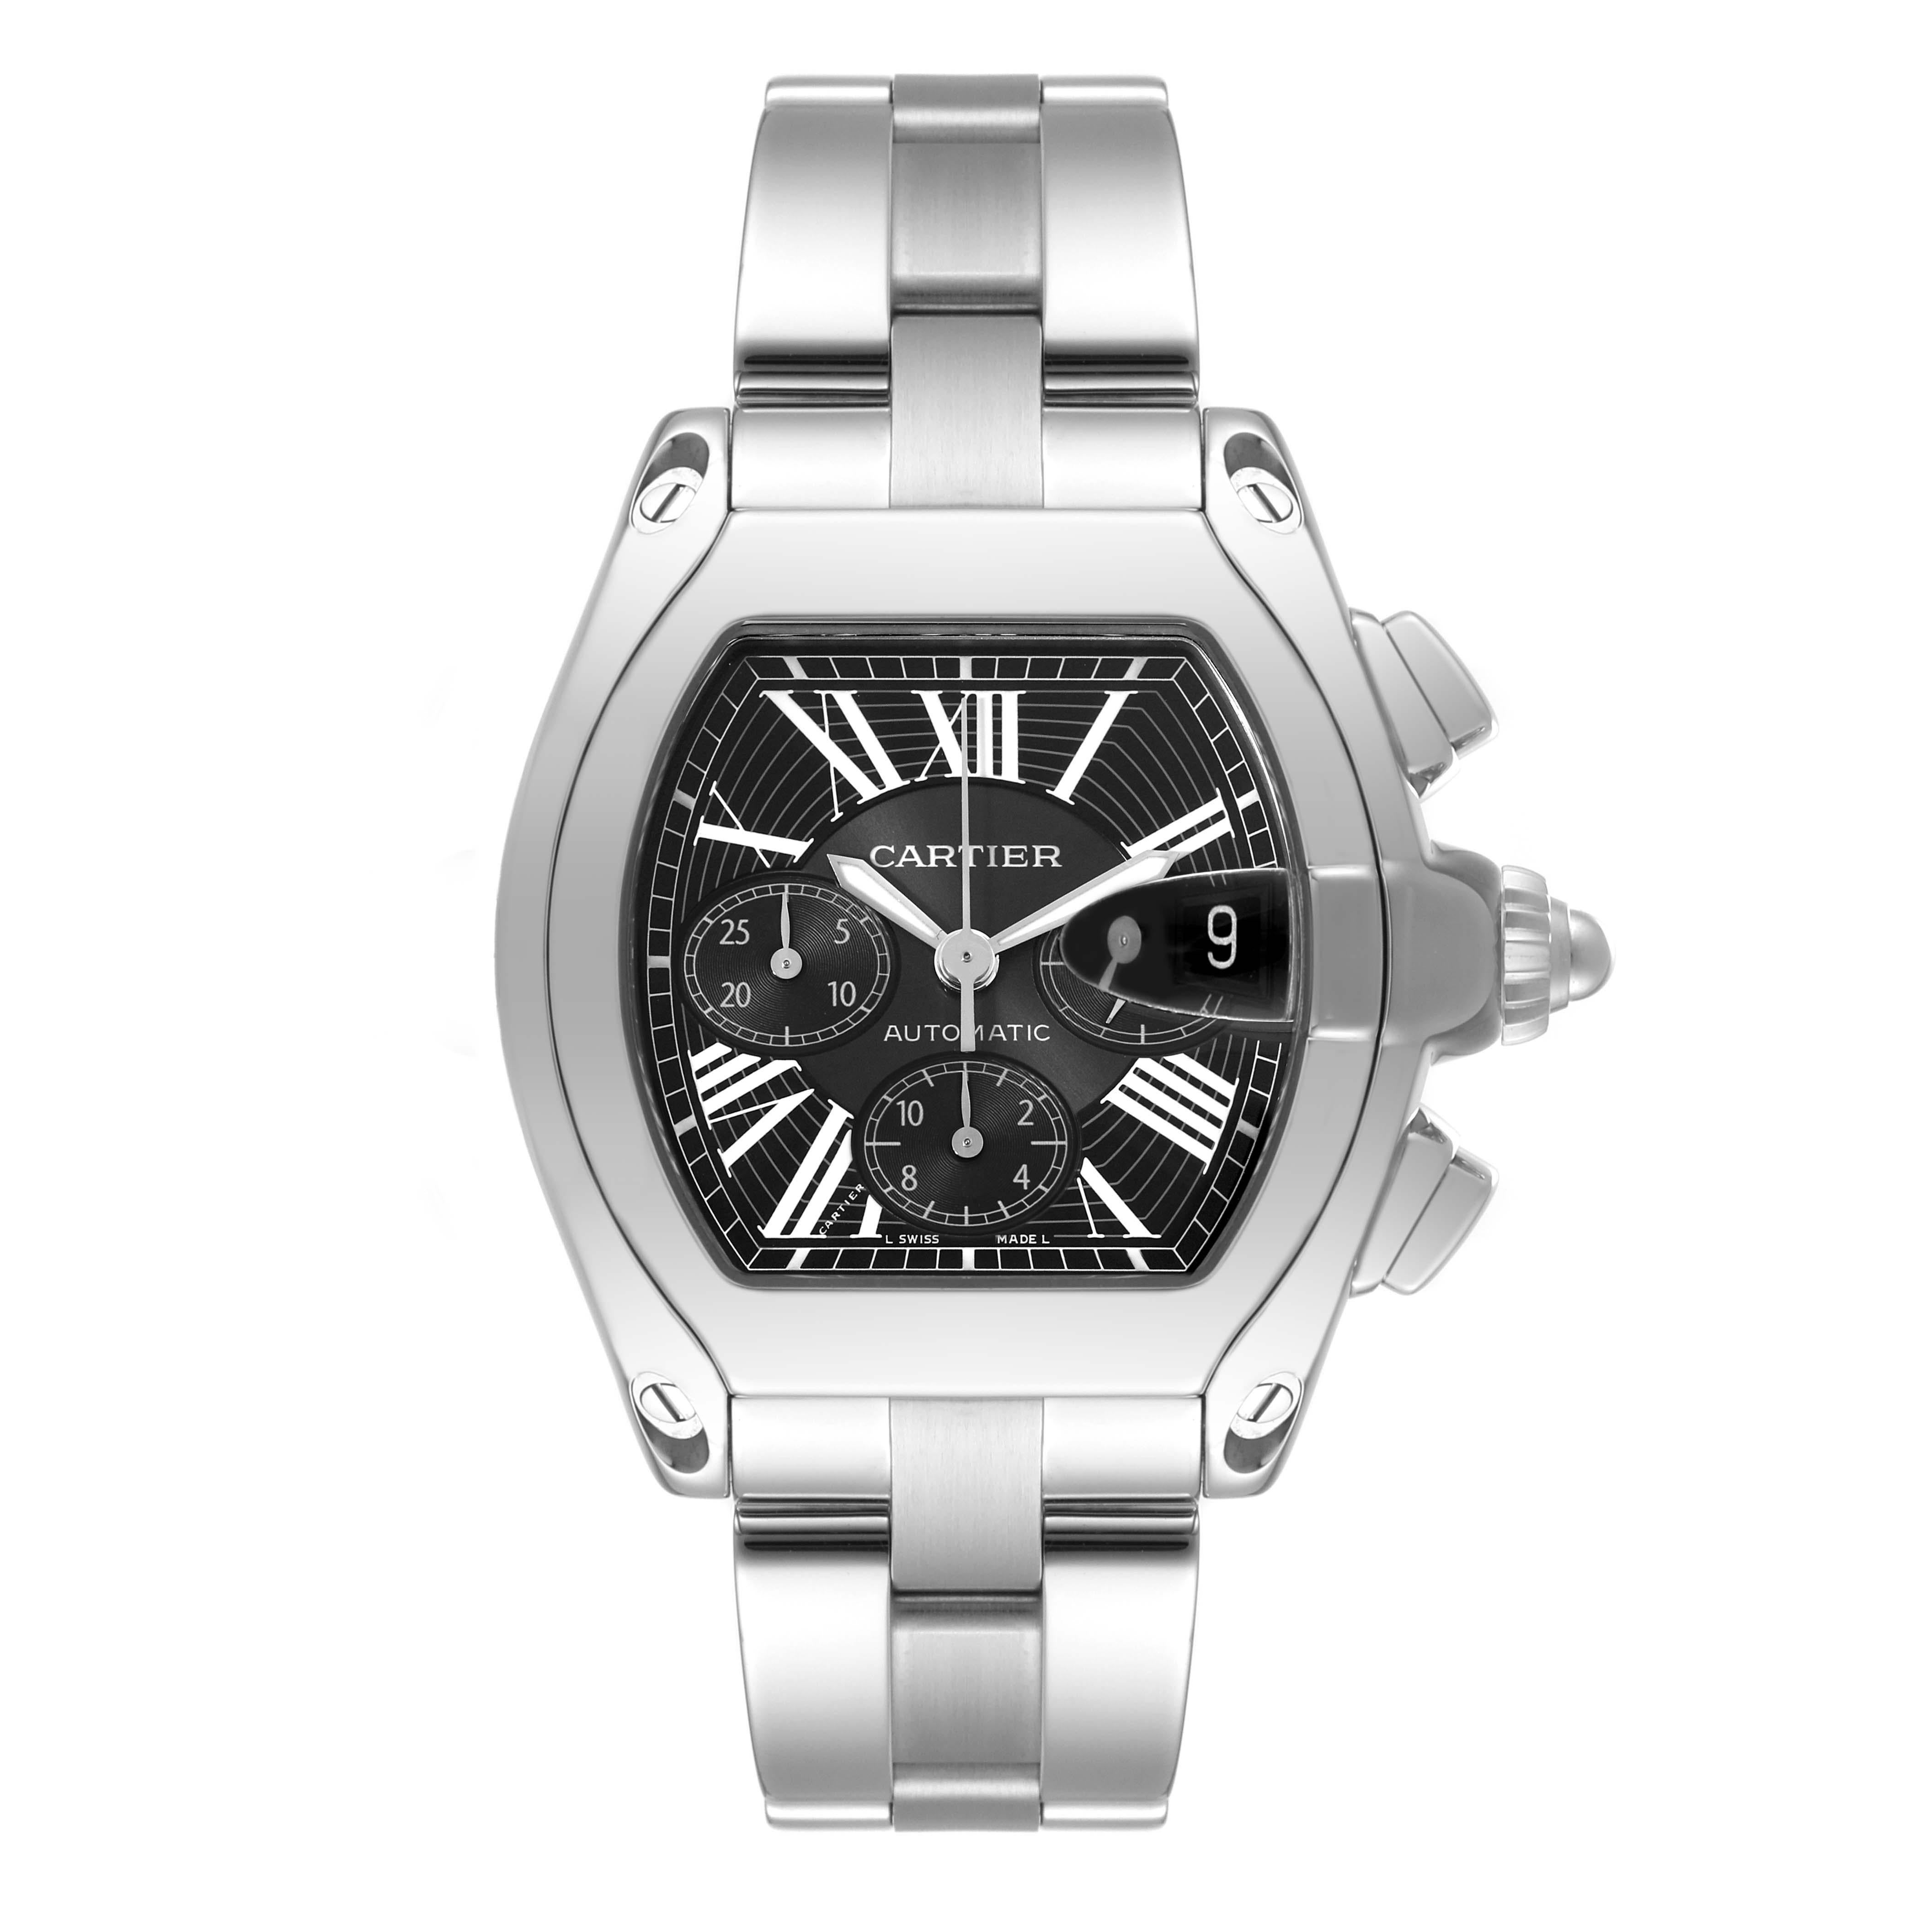 Cartier Roadster XL Chronograph Steel Mens Watch W62020X6 Papers. Automatic self-winding movement with chronograph function. Stainless steel tonneau shaped case 49 x 43 mm. . Scratch resistant sapphire crystal with cyclops magnifier. Black sunray